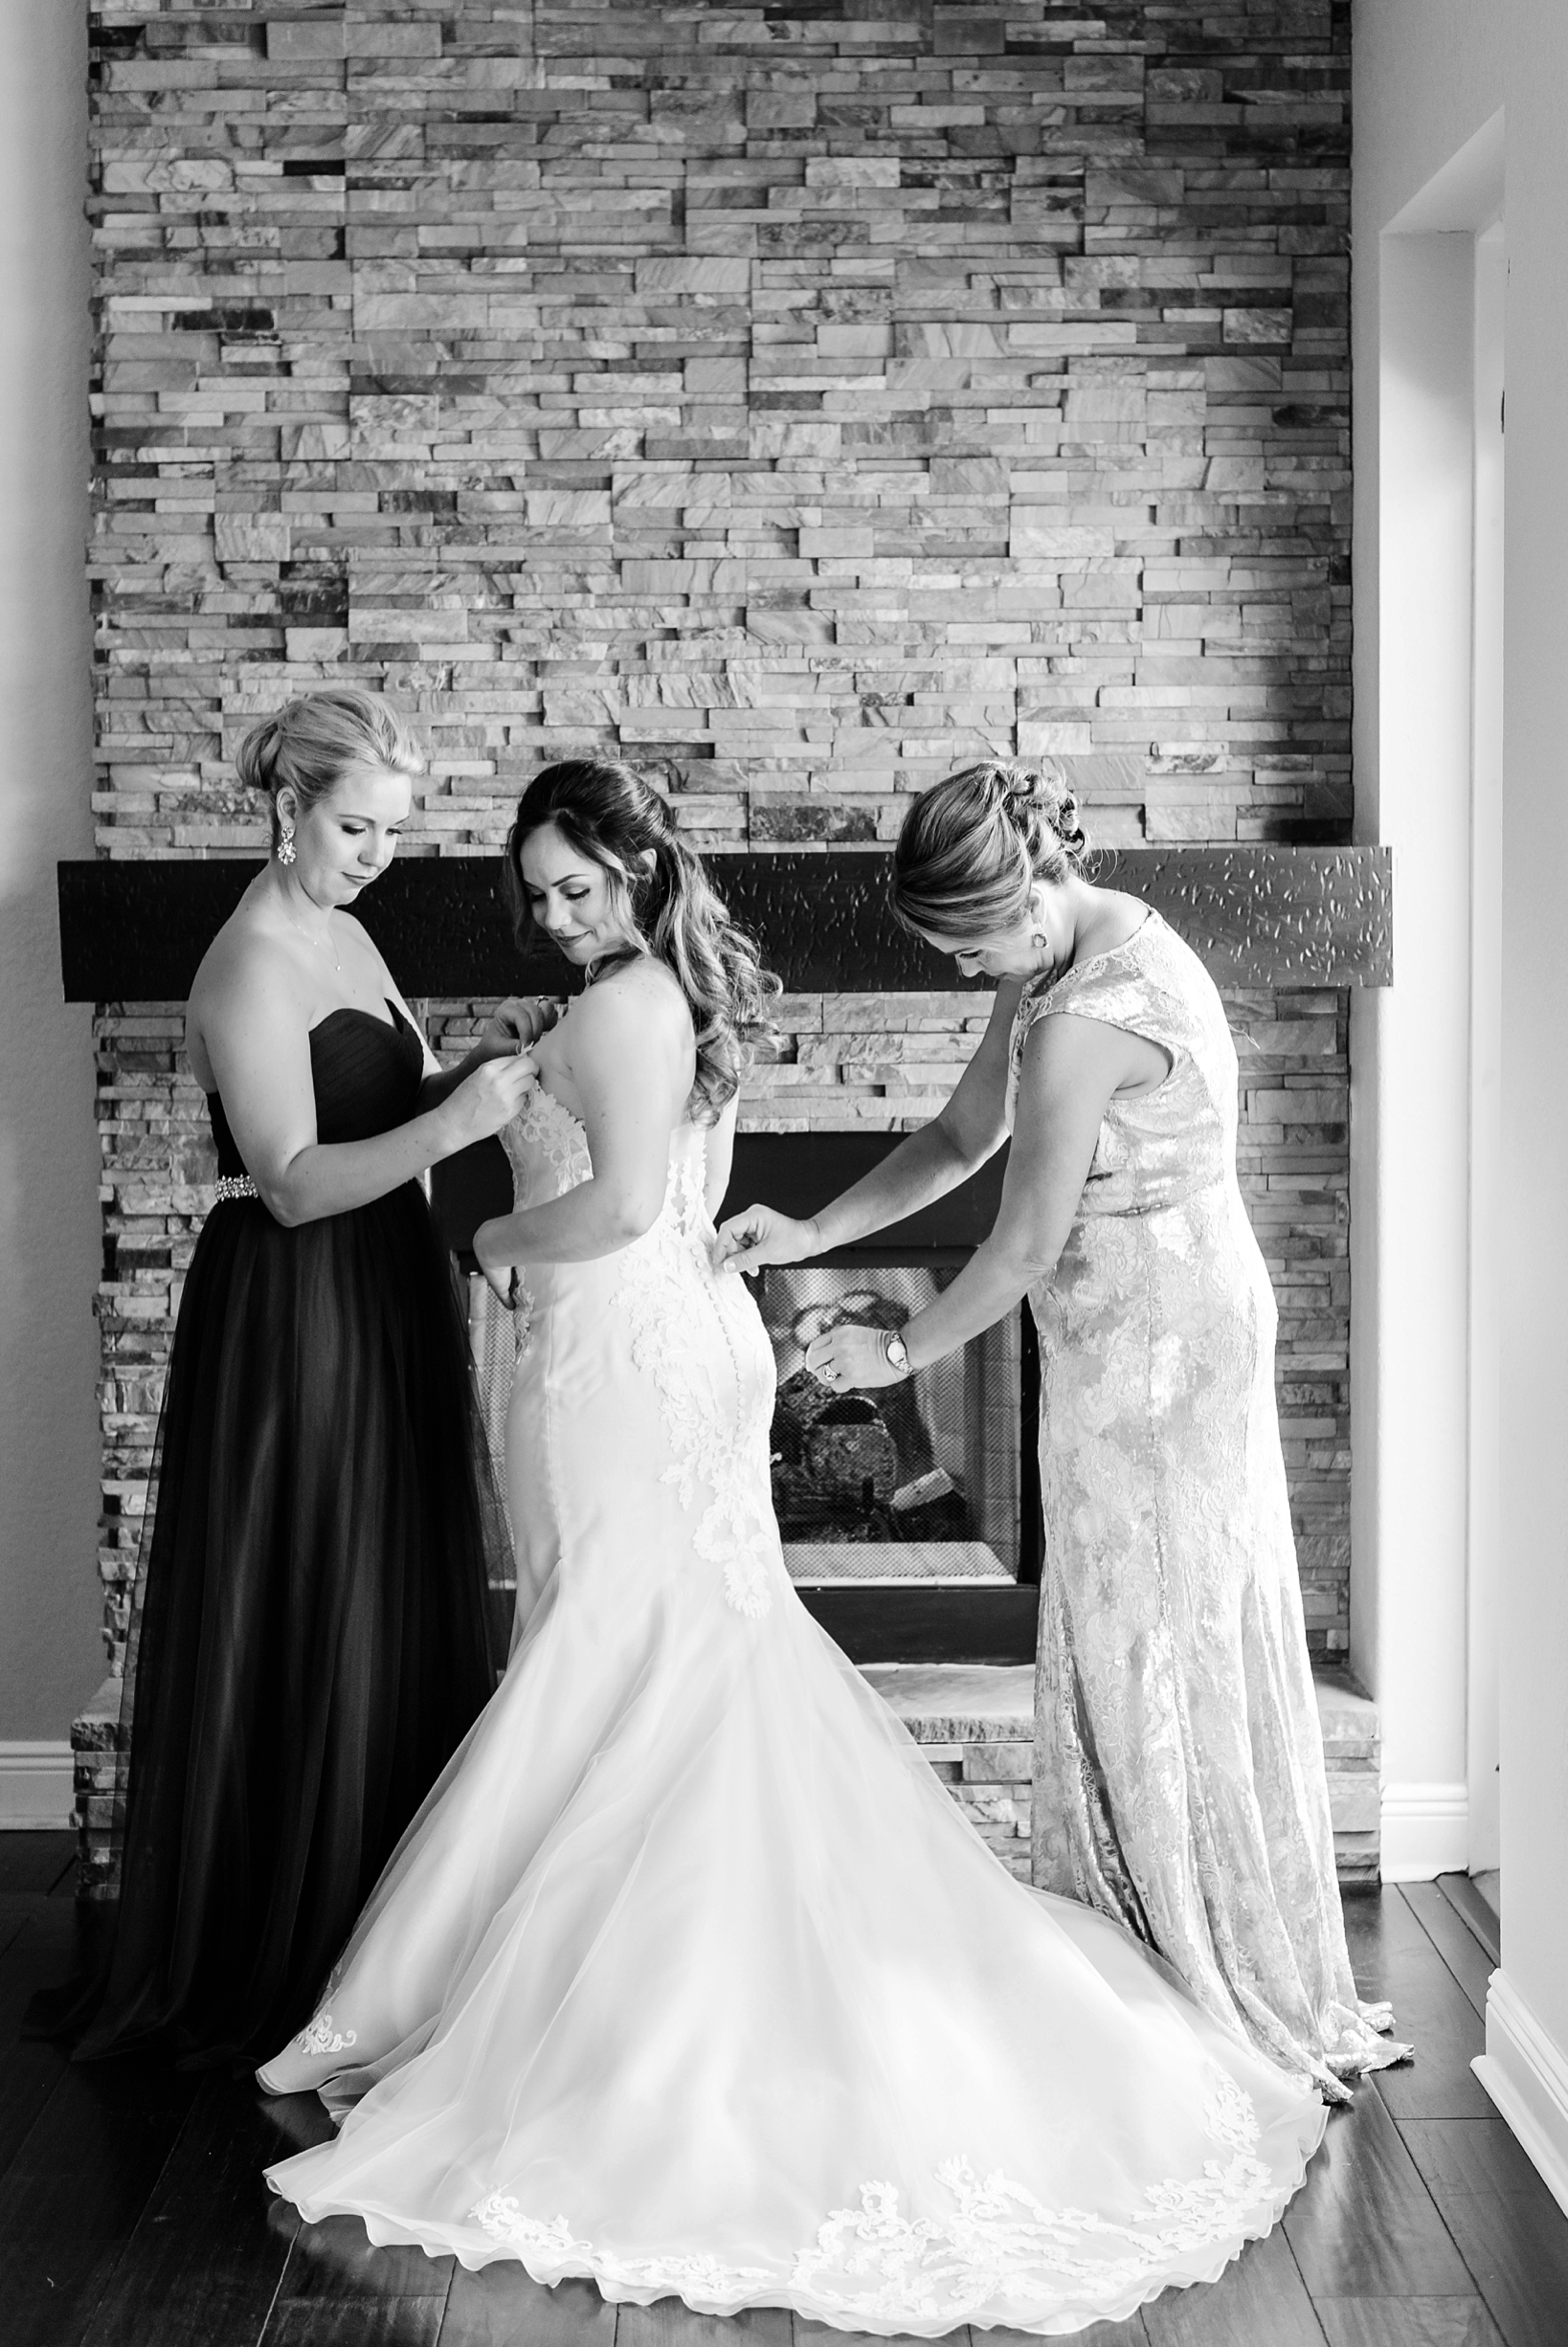 Black and white image of the bride getting into her wedding dress